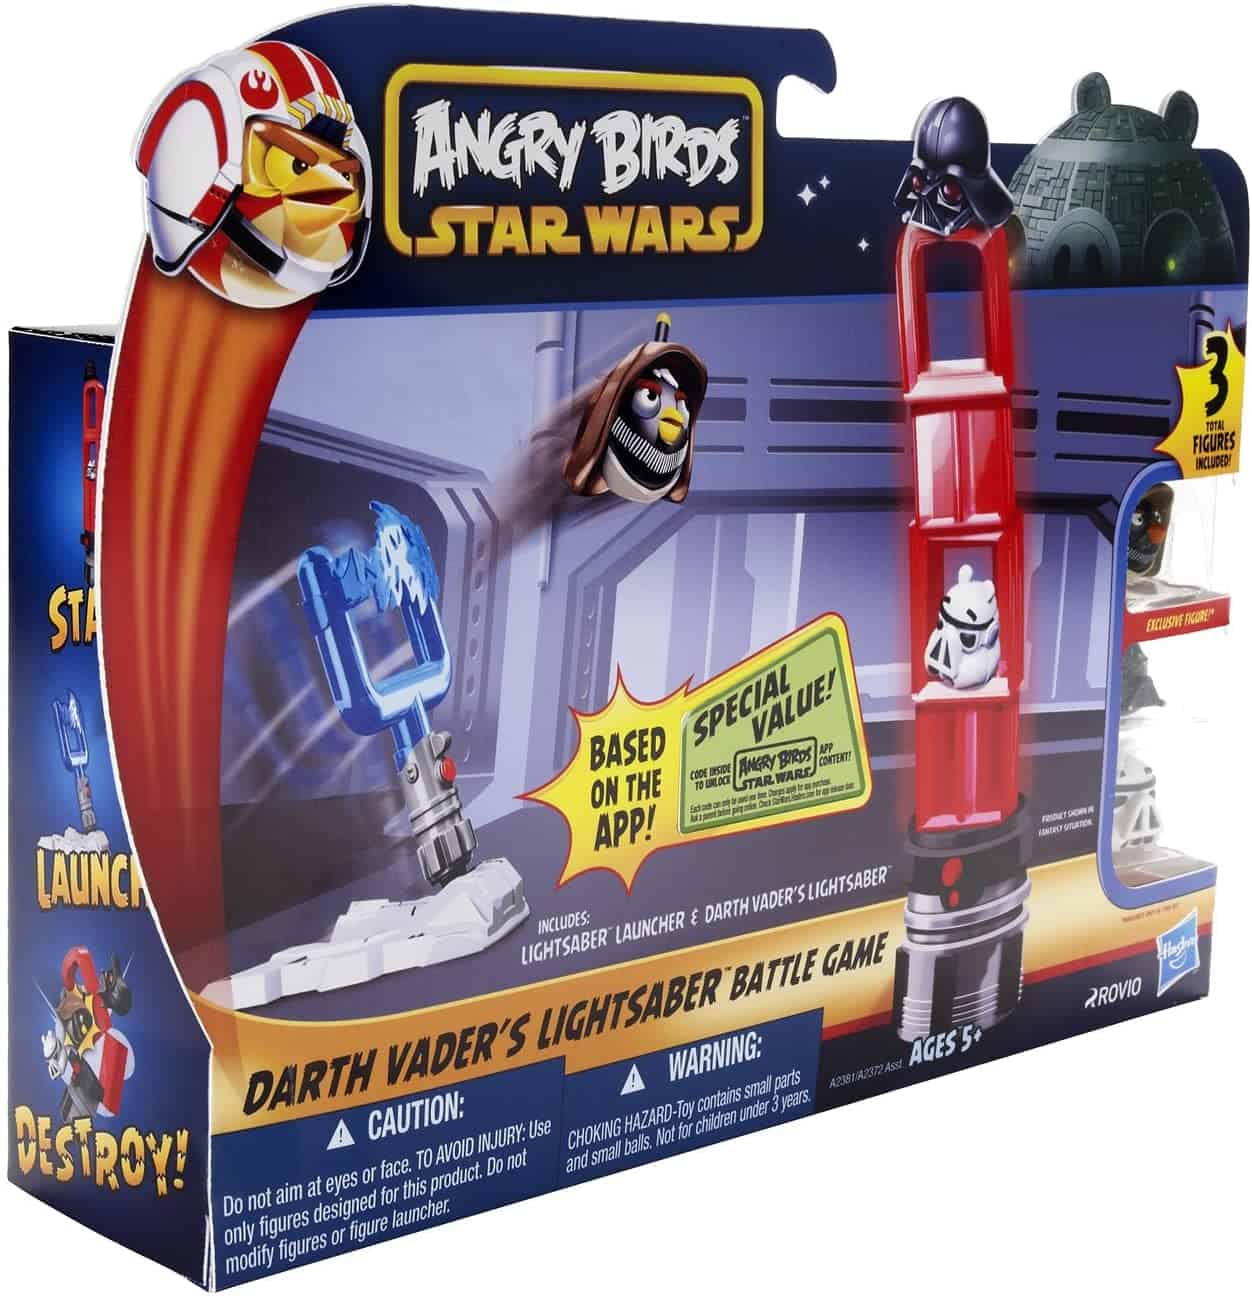 Angry Birds Star Wars Darth Vader’s Lightsaber Battle Review